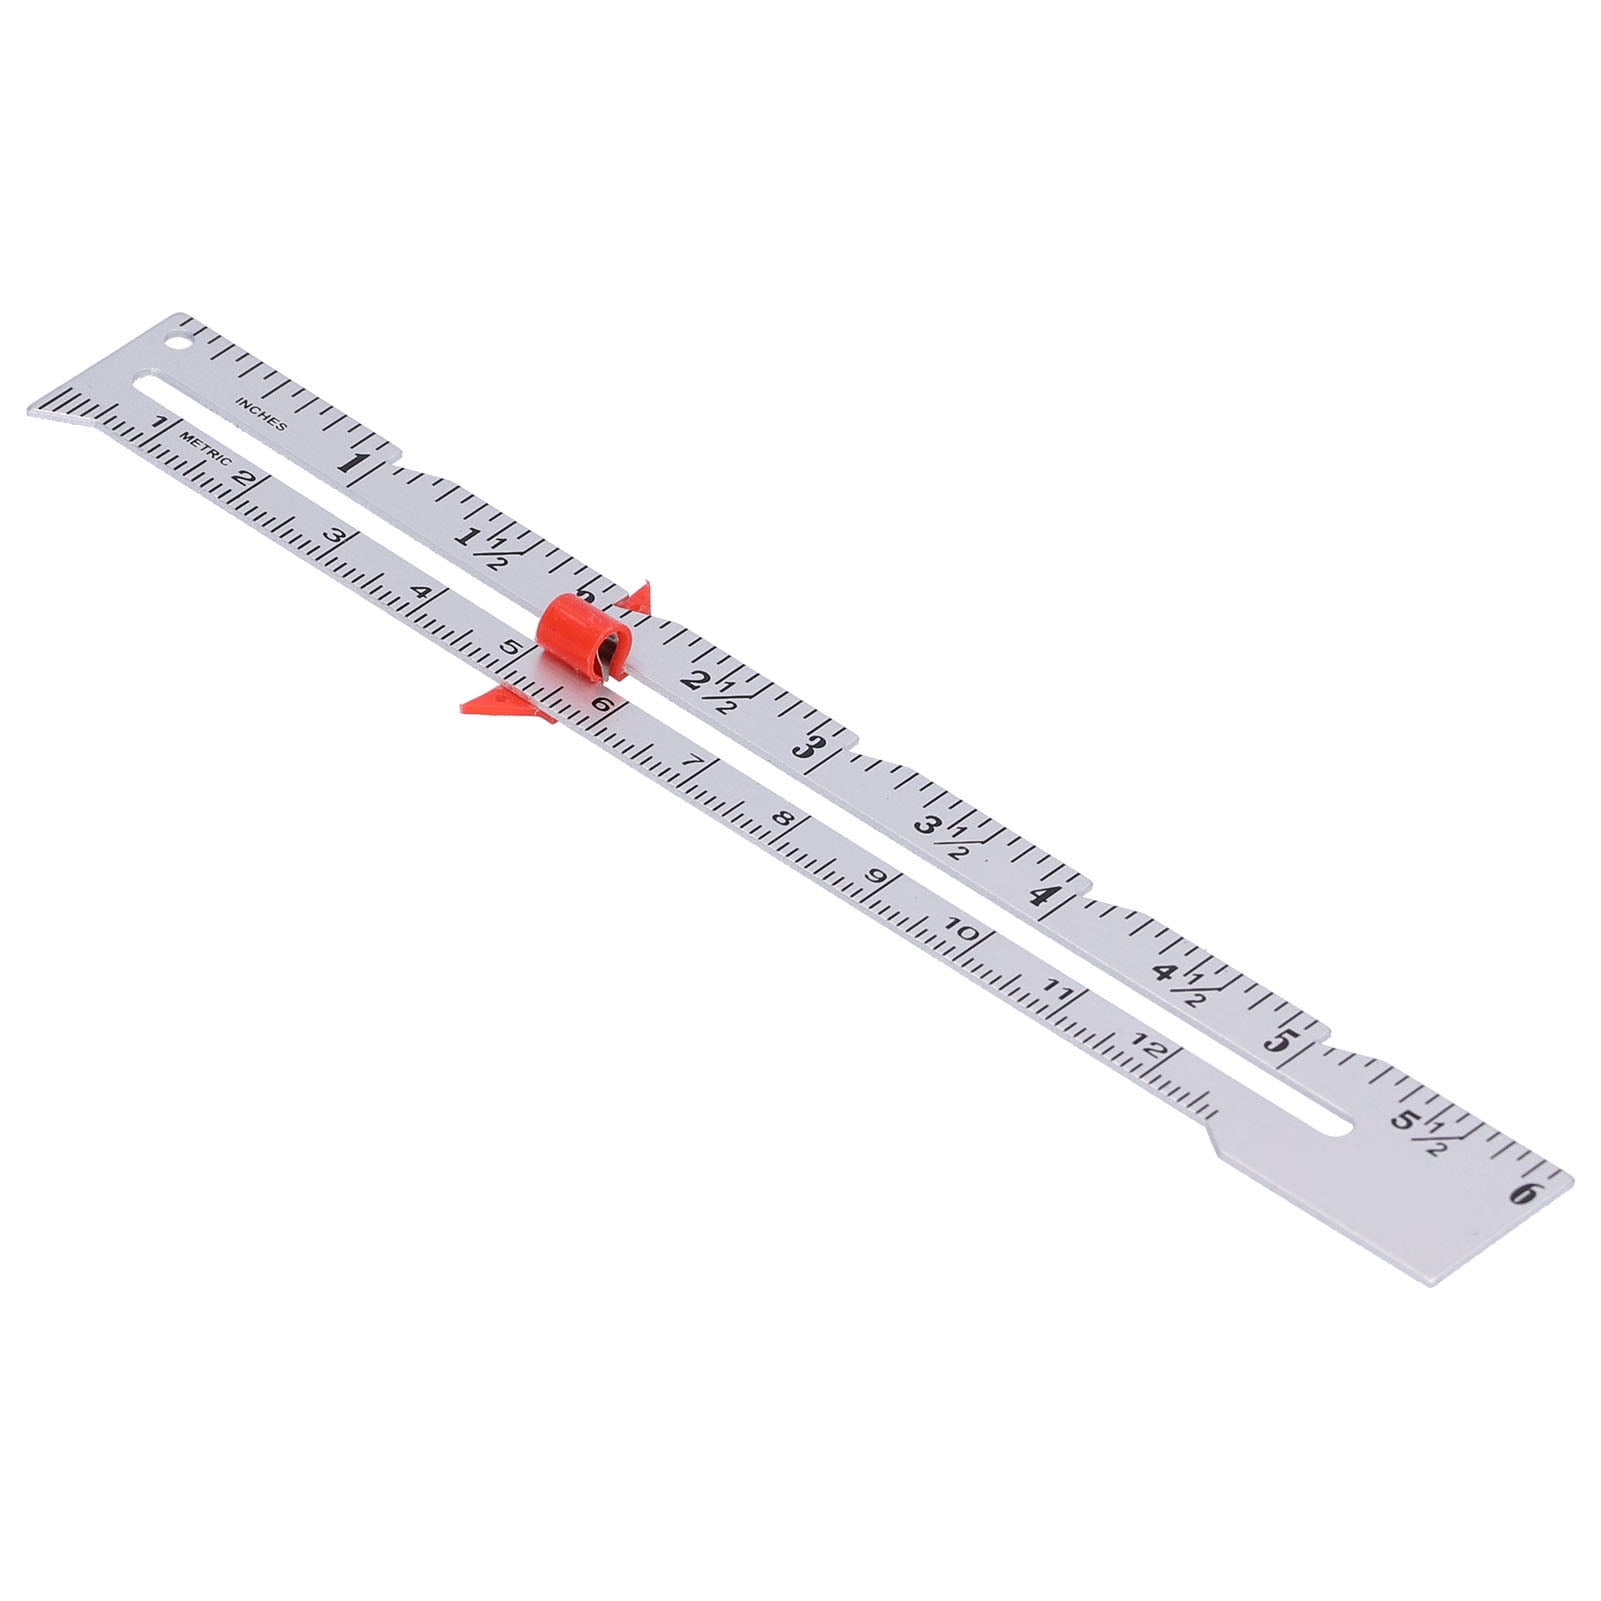 Sewing Measuring Tools ~ Sewing